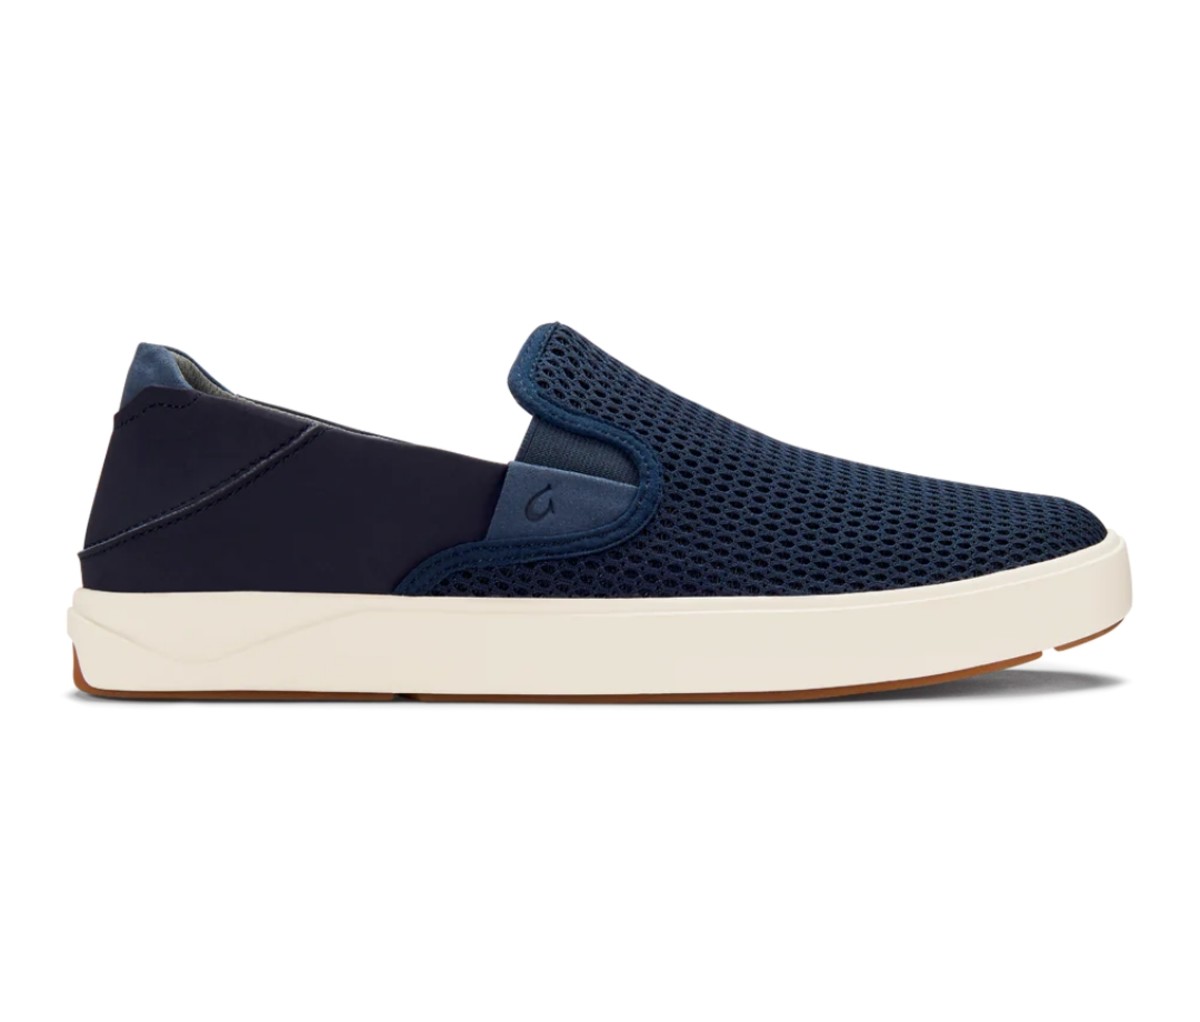 Women's Slip-On Sneakers & Athletic Shoes | Nordstrom